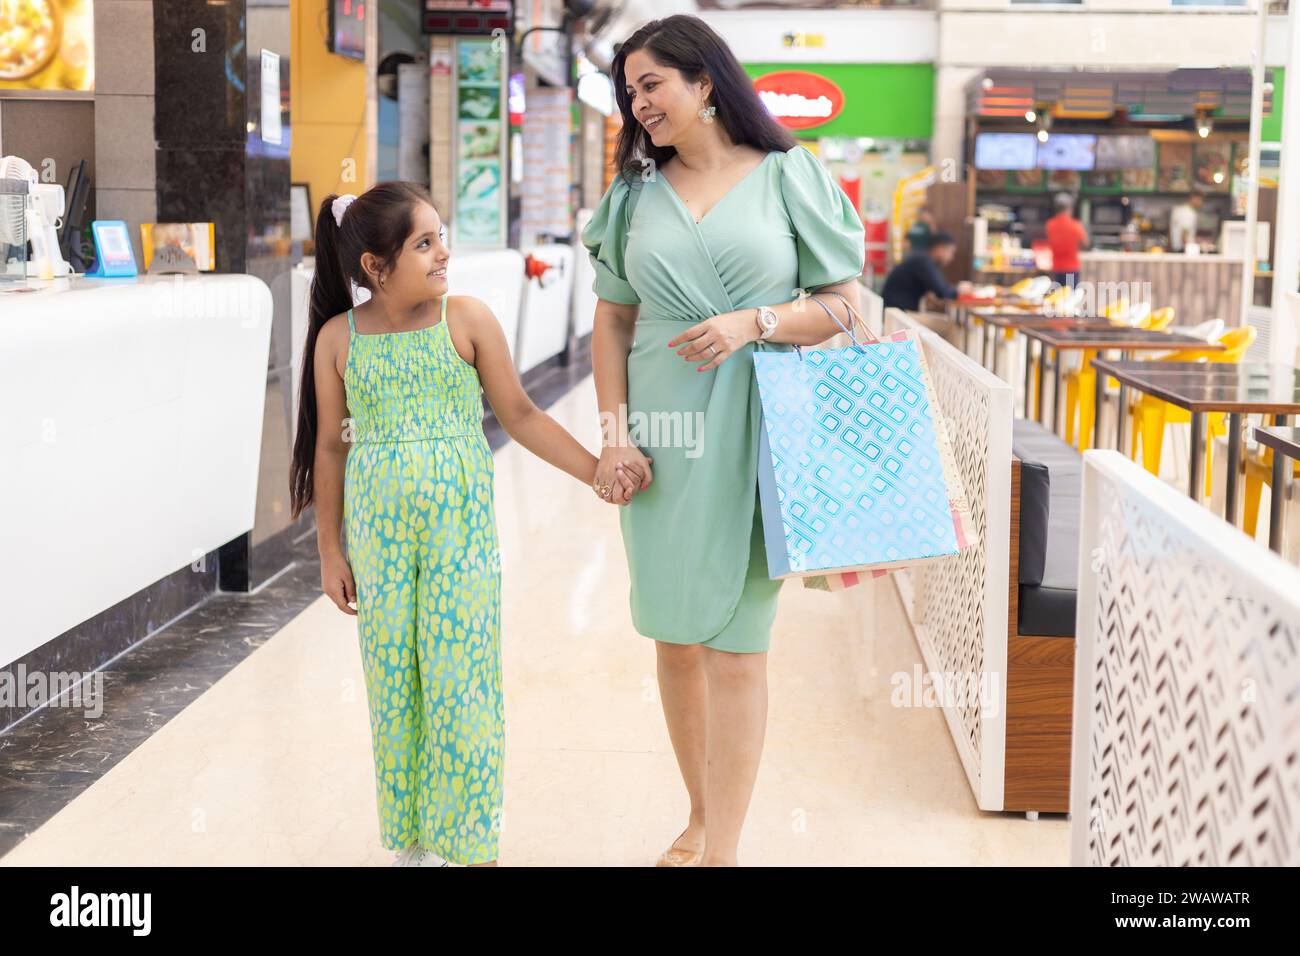 Happy Indian mother and daughter with paper bags, shopper bags walking in mall holding each other hands. Shopping concept Stock Photo